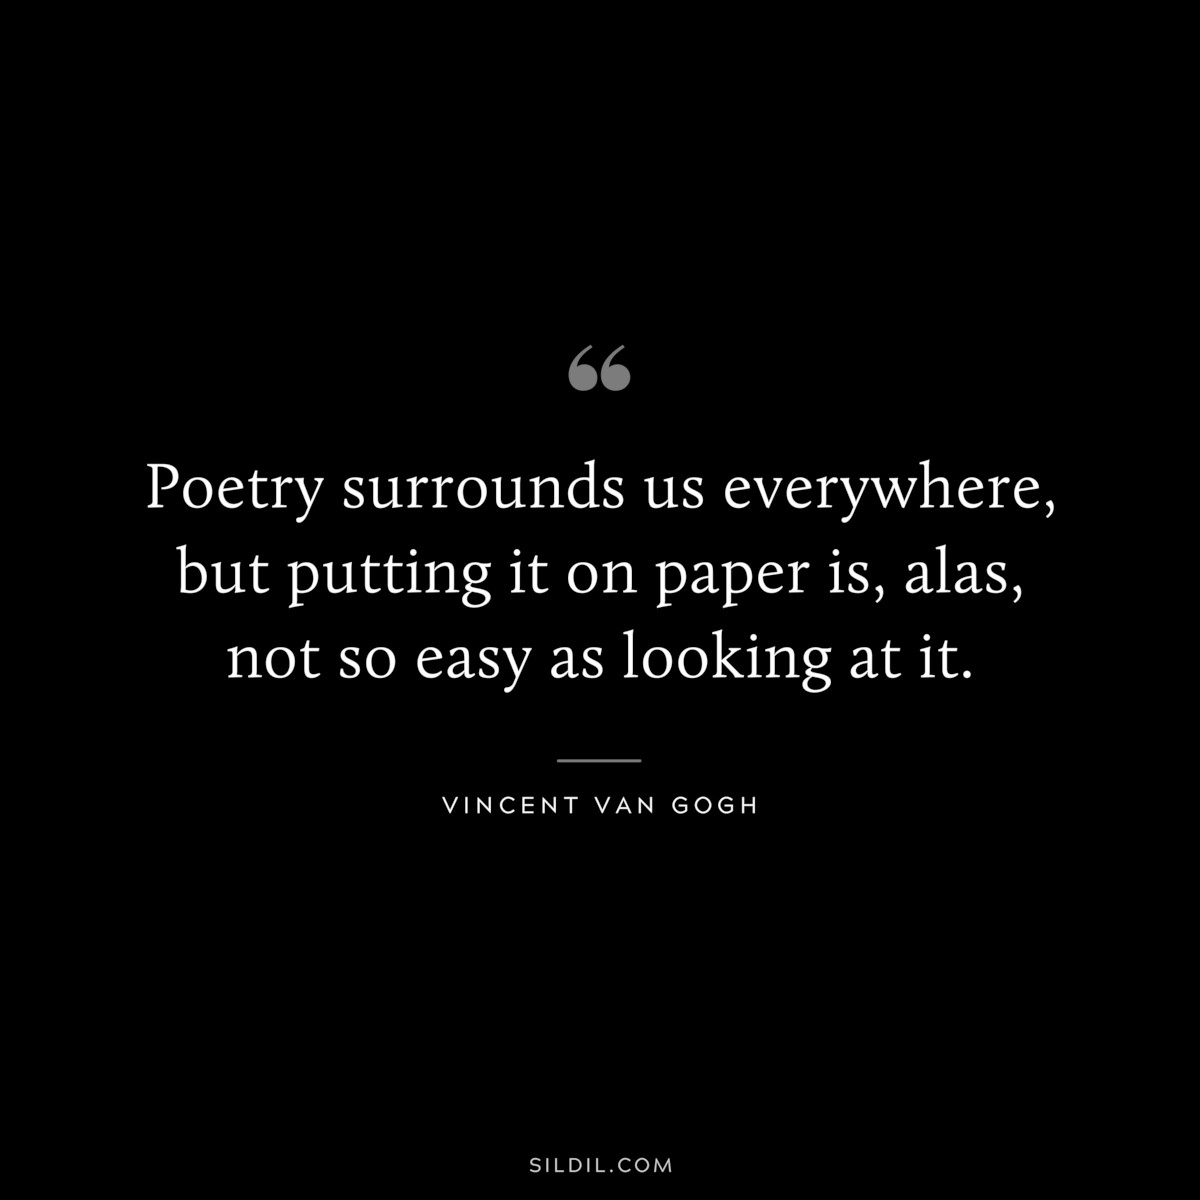 Poetry surrounds us everywhere, but putting it on paper is, alas, not so easy as looking at it. ― Vincent van Gogh